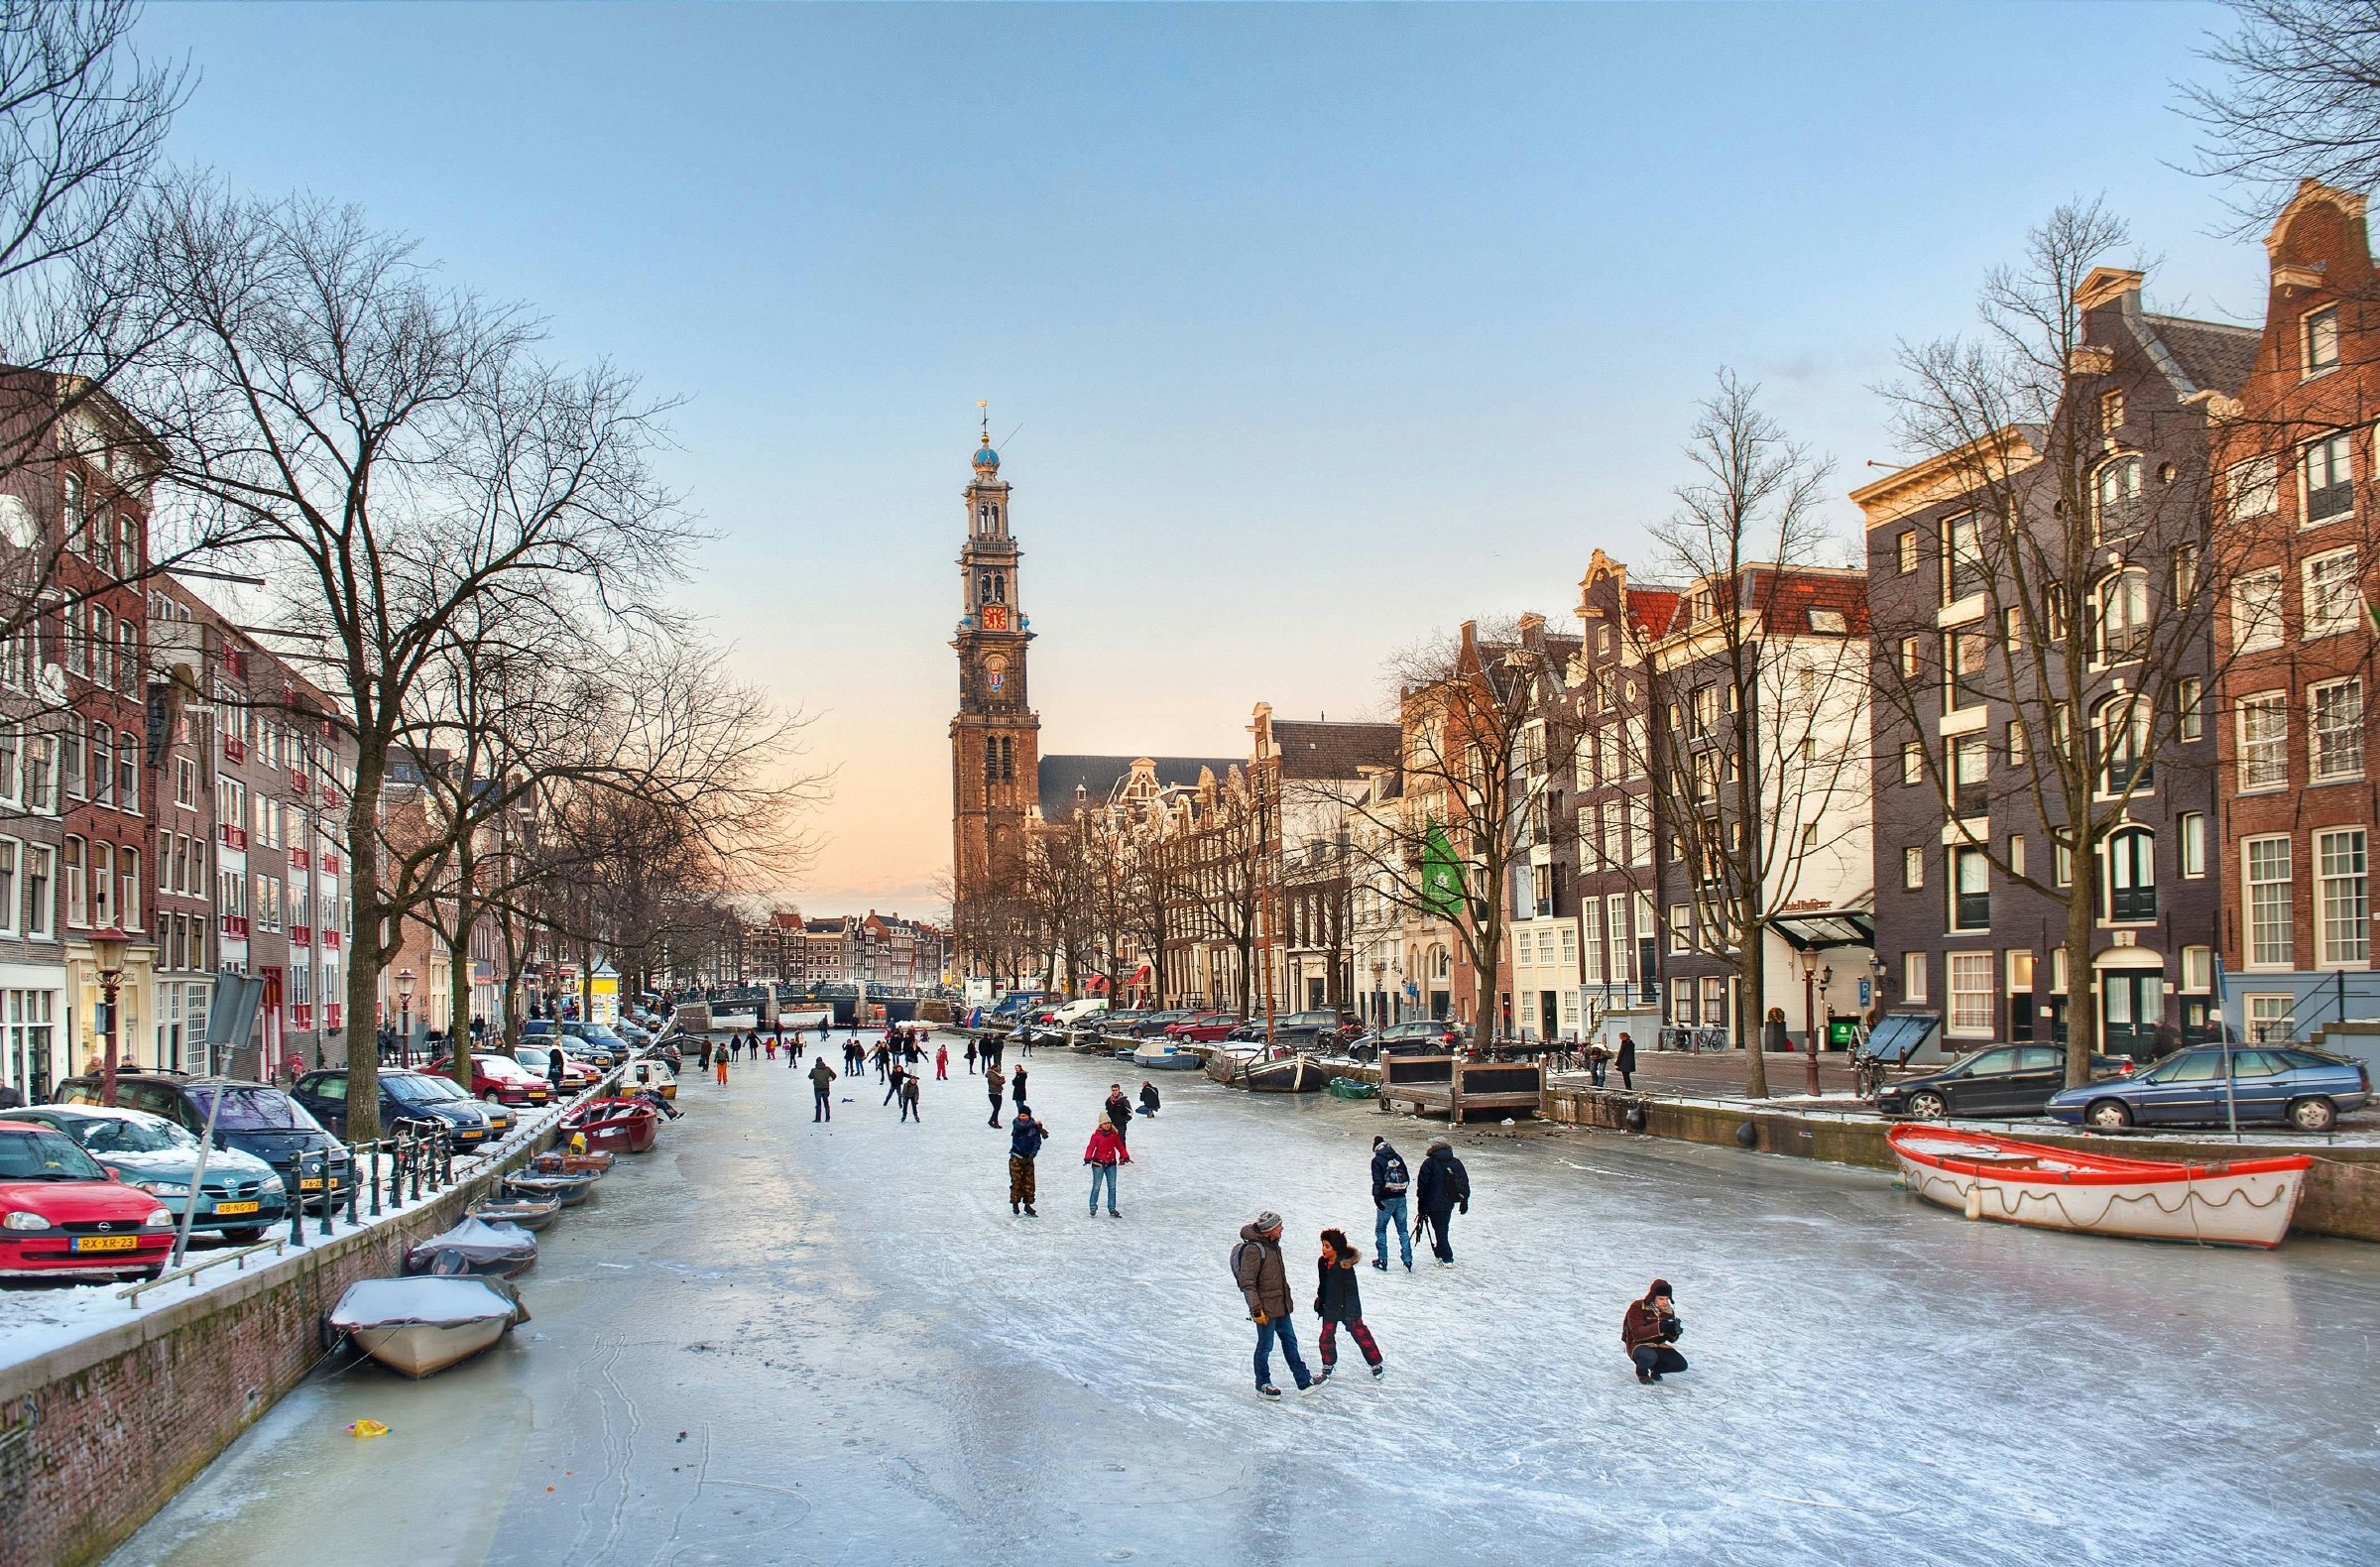 Skaters on the ice in Amsterdam’s Prinsengracht canal on a winter evening. 